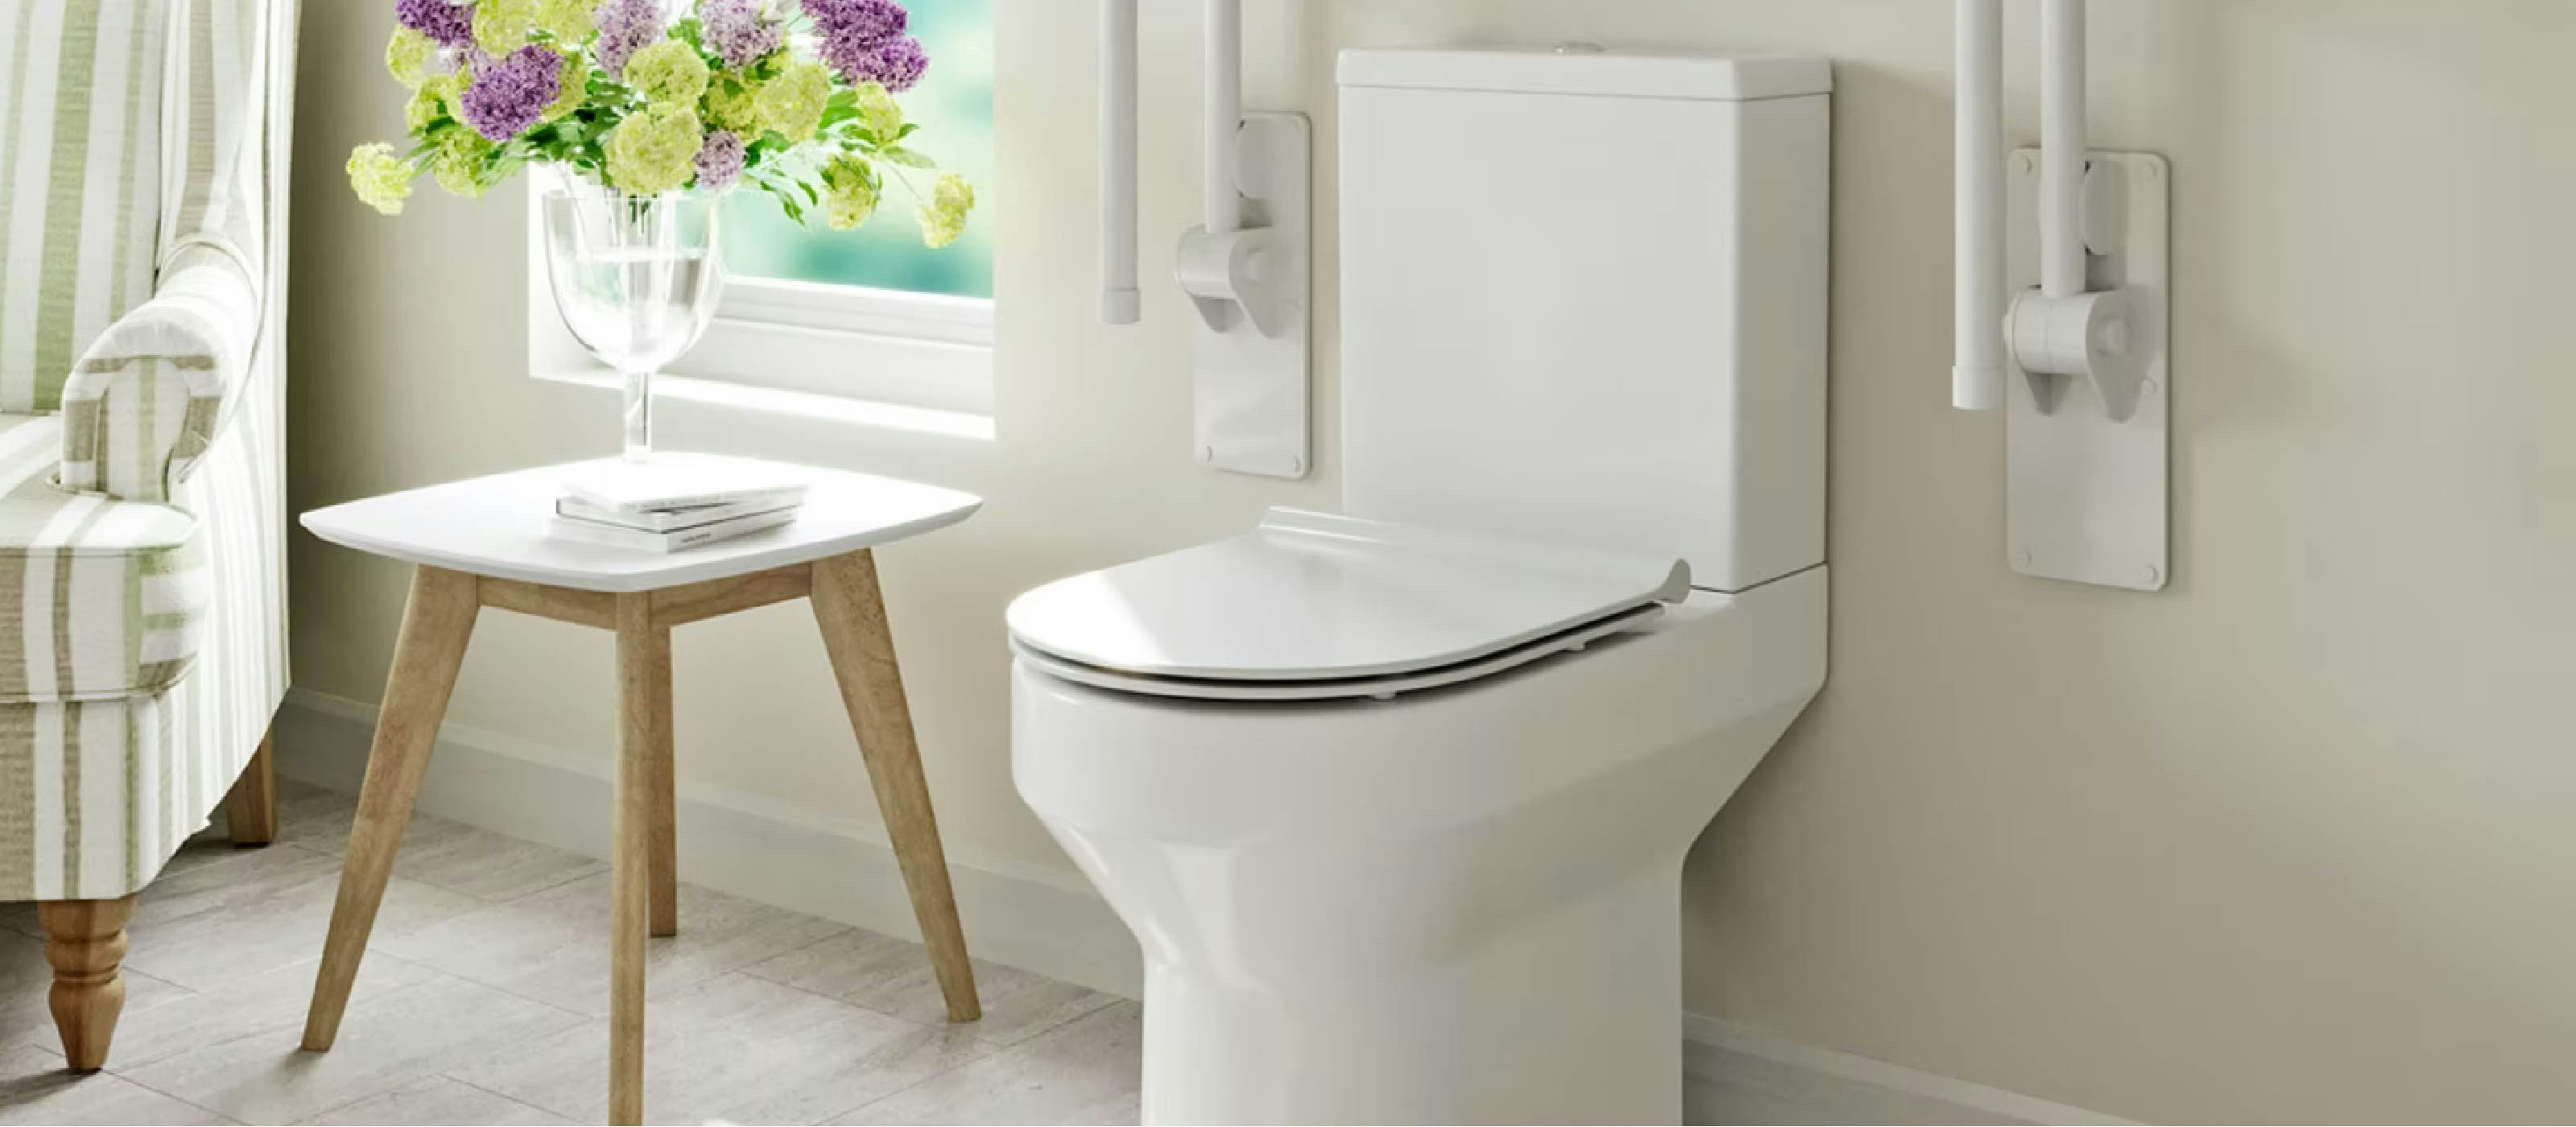 What is the best height for a toilet? | VictoriaPlum.com